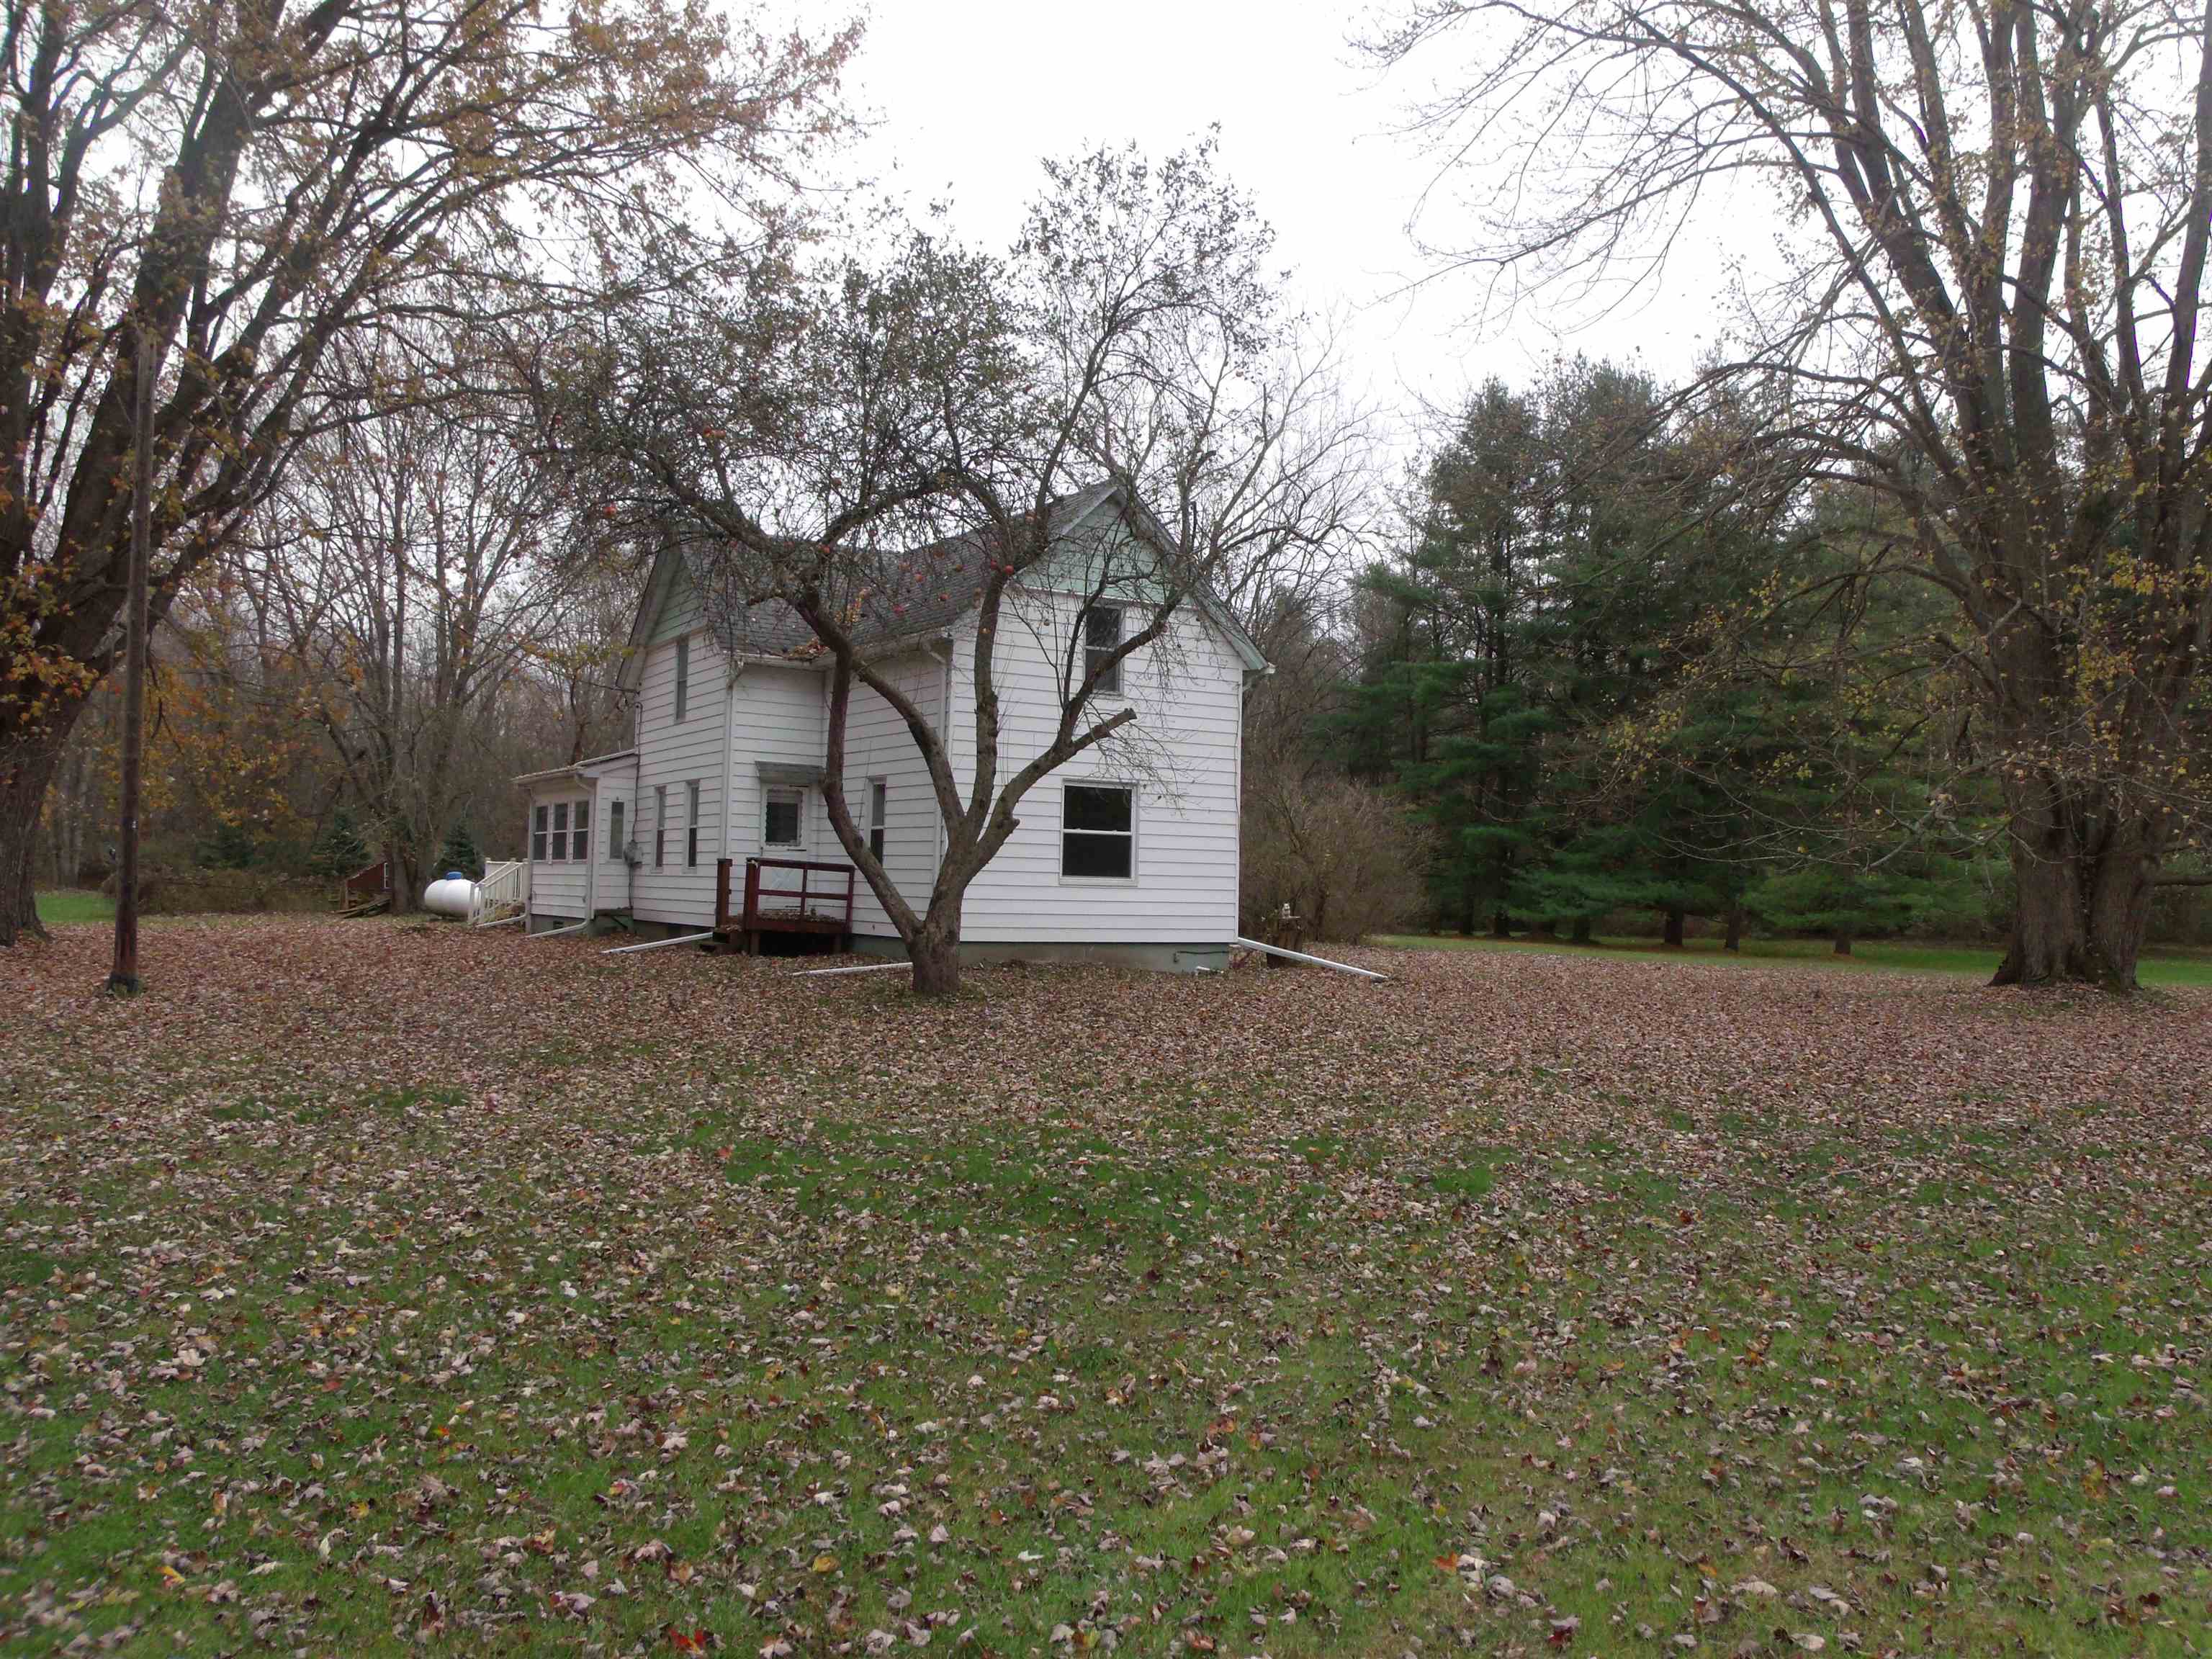 This amazing opportunity 3 bed 1 bath farm house is ready for your country touches to make it your own, sitting on 3 beautiful acres with pond, and sits back off the road so plenty of deer come through the property for the apple trees. New furnace in 2023, newer roof, siding and windows all in 2013, new block foundation. Back deck and 2 sun-rooms to watch all the wild life.With a shed and a Kennel or Chicken coop. Home just had a BANK APPRAISAL  sq ft is from that appraisal. Home being sold as is.